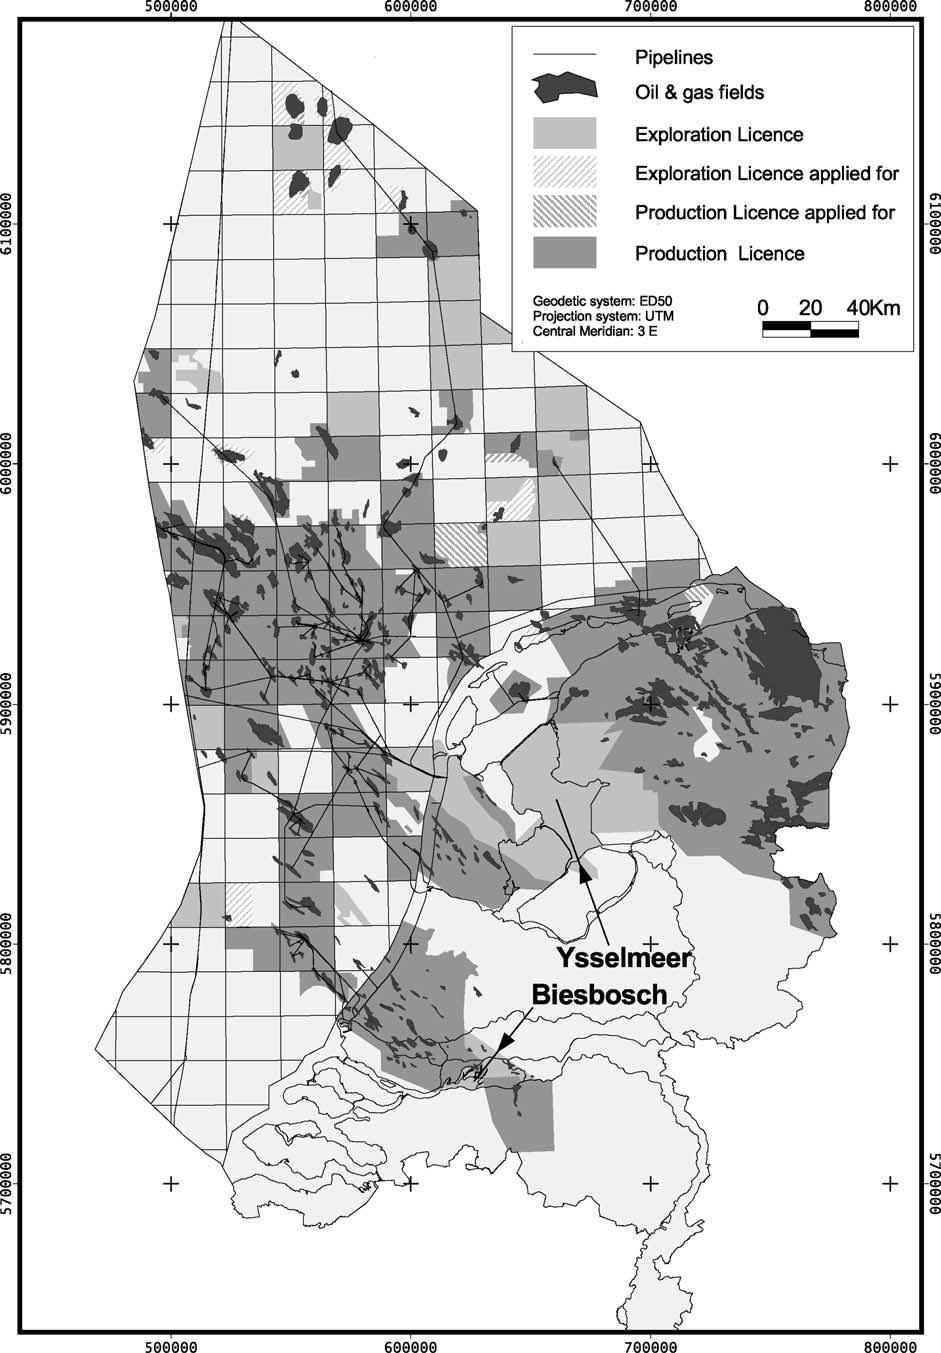 70 J. BREUNESE ET AL. Fig. 1. Licenses and gas fields in the Netherlands. system of offshore rounds existed. The peak in 1993 marks the eighth round of applications for exploration licences.